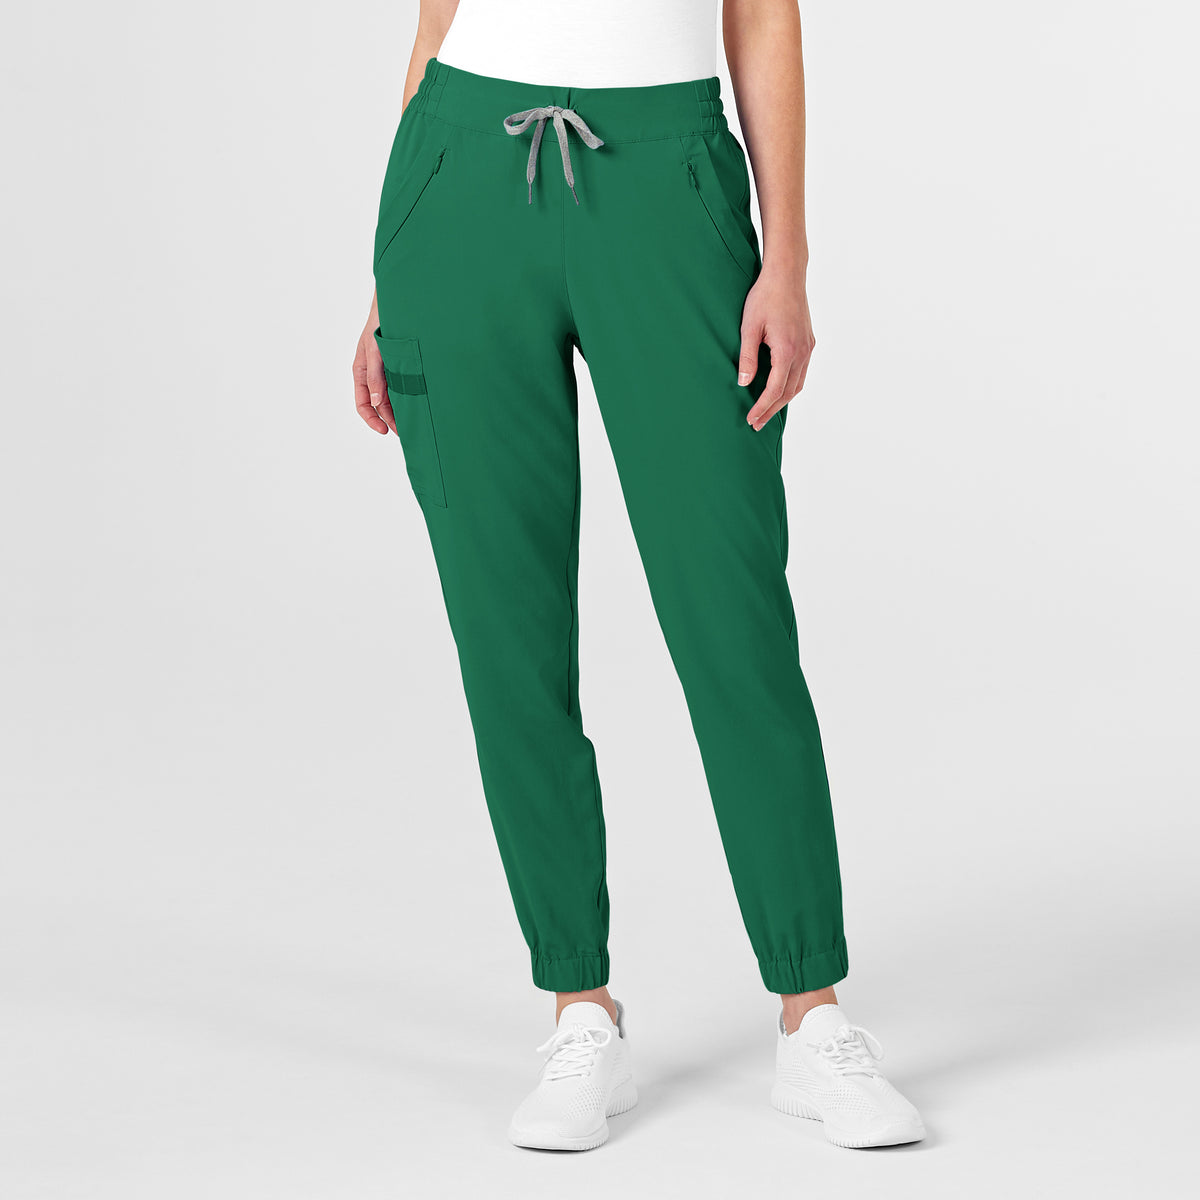 U.S. Polo Assn. Essentials Womens Lounge Pants with Pockets, Plus Size  Sweatpants for Women (Mint-heather, 1X)